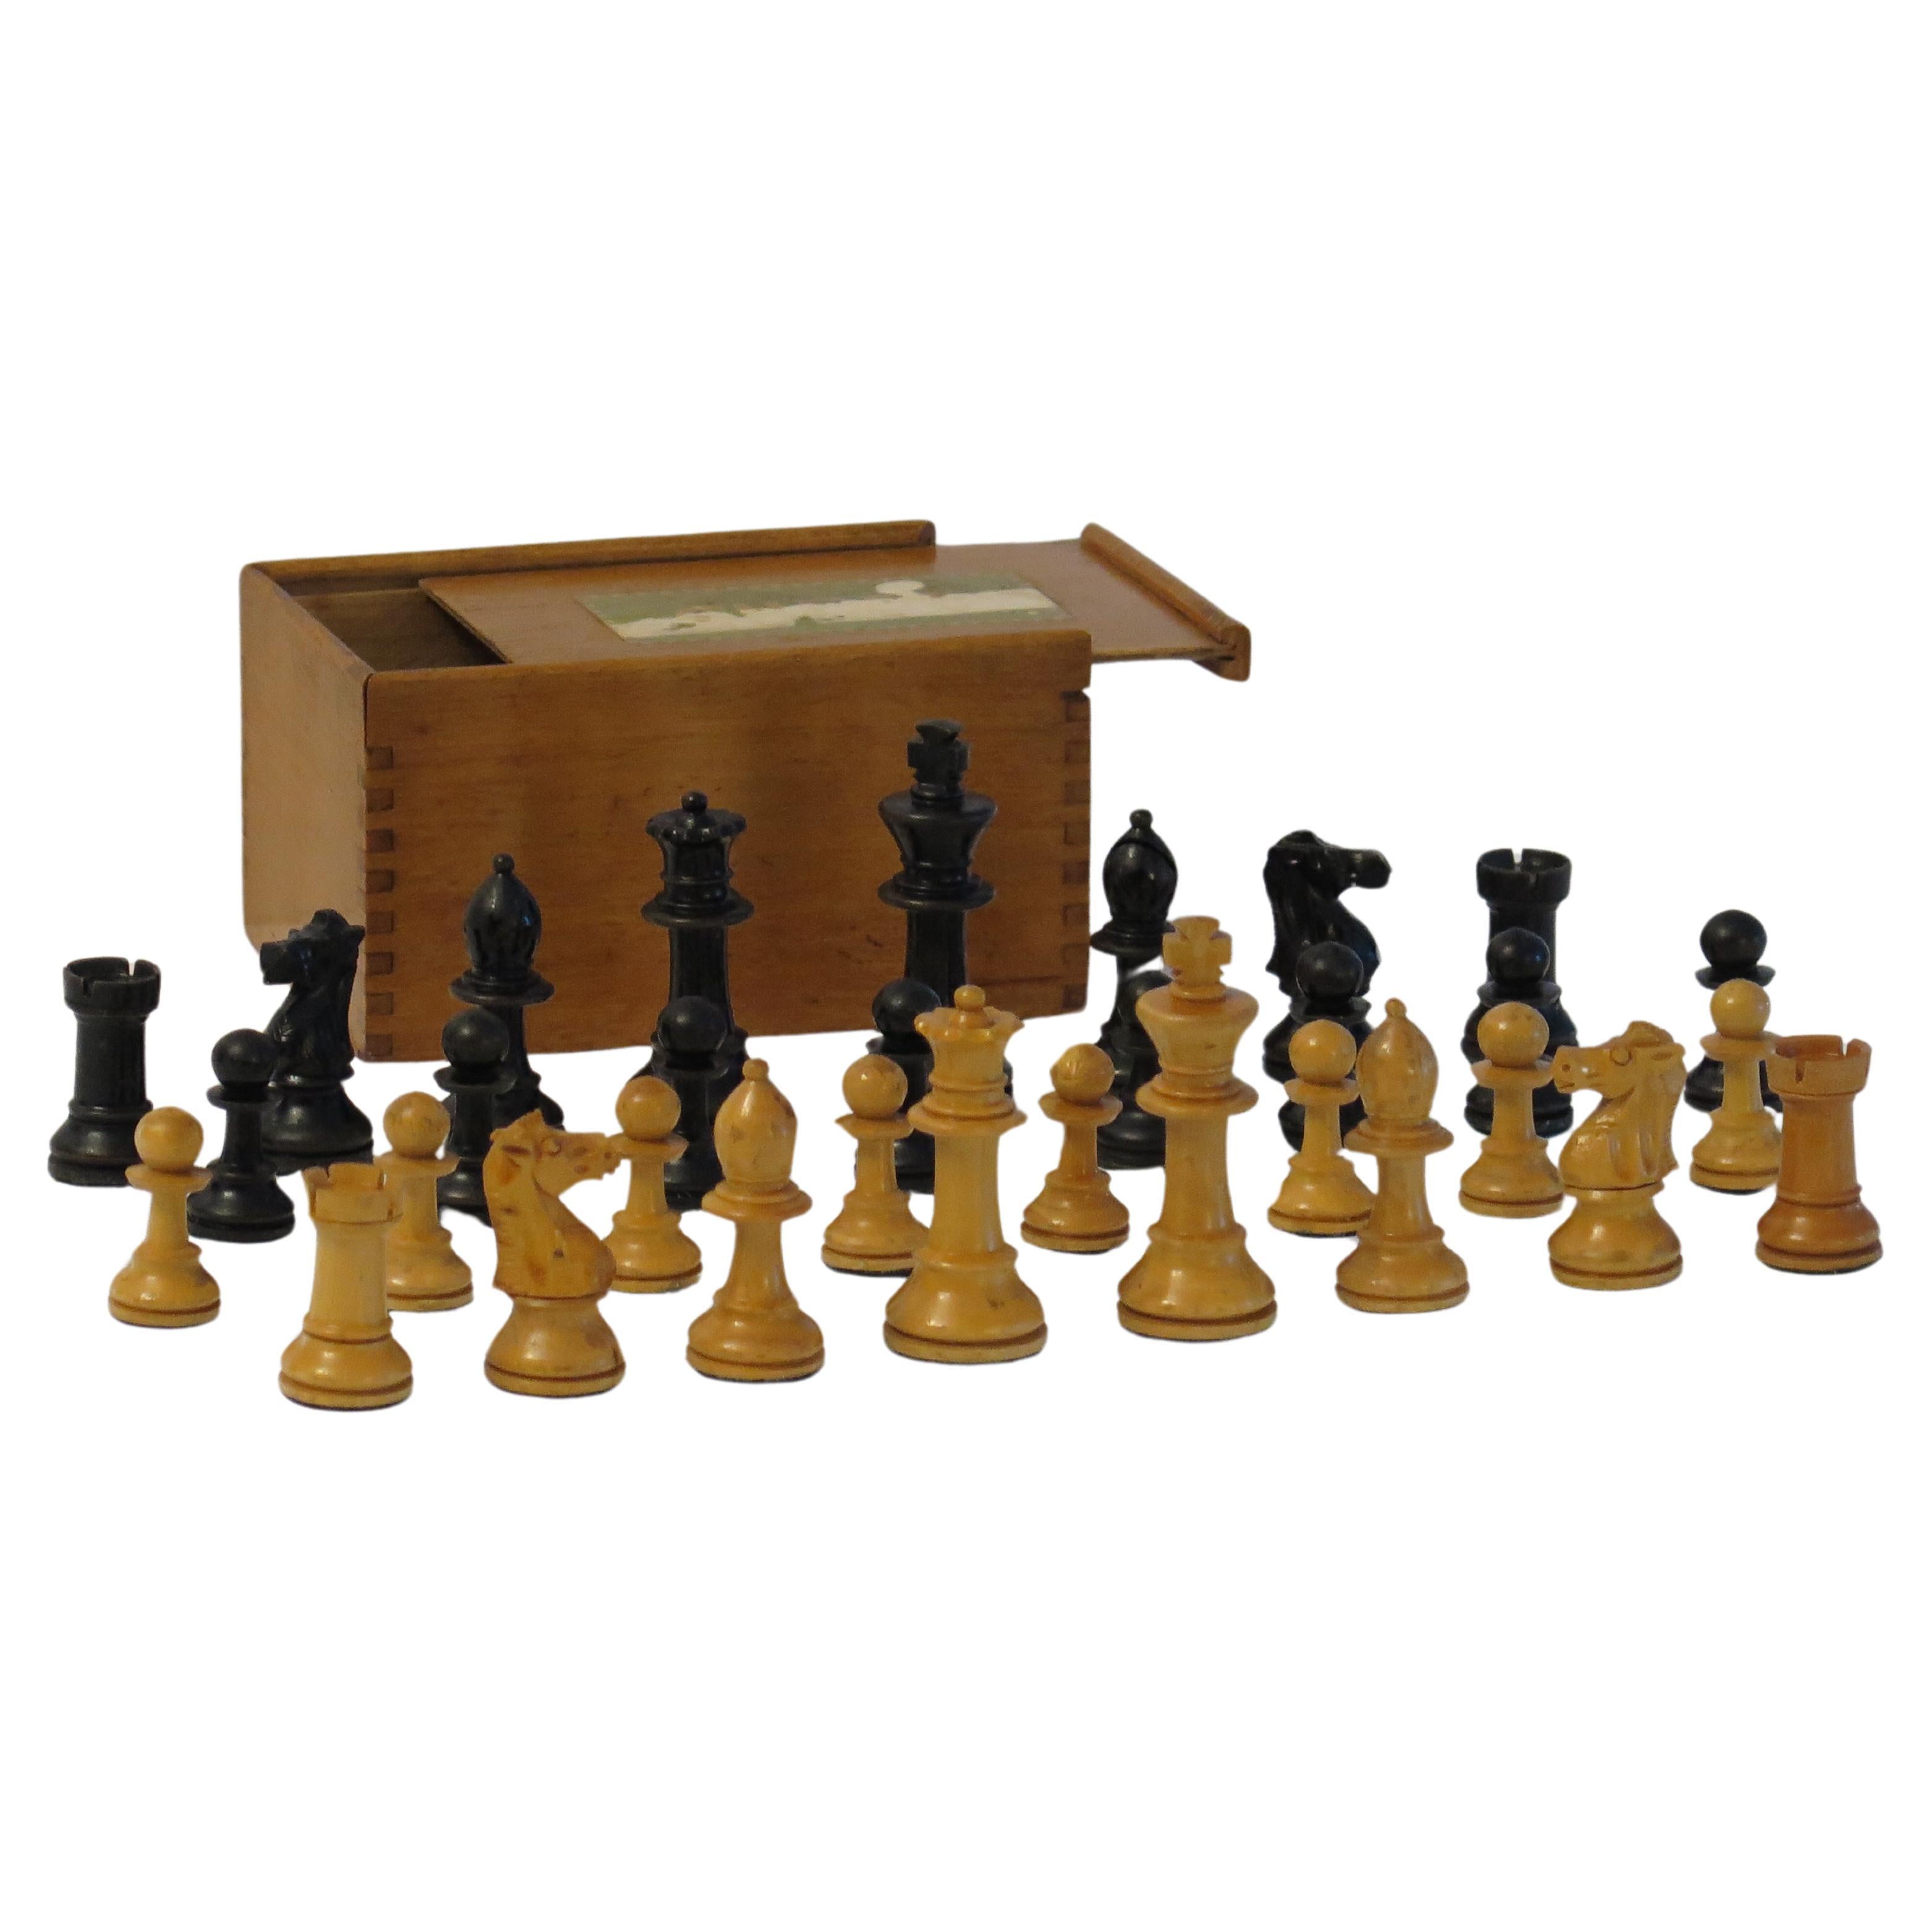 Staunton Fierce Knight Weighted Club Chesss Set 8.5cm Kings Jointed Box, 19th C